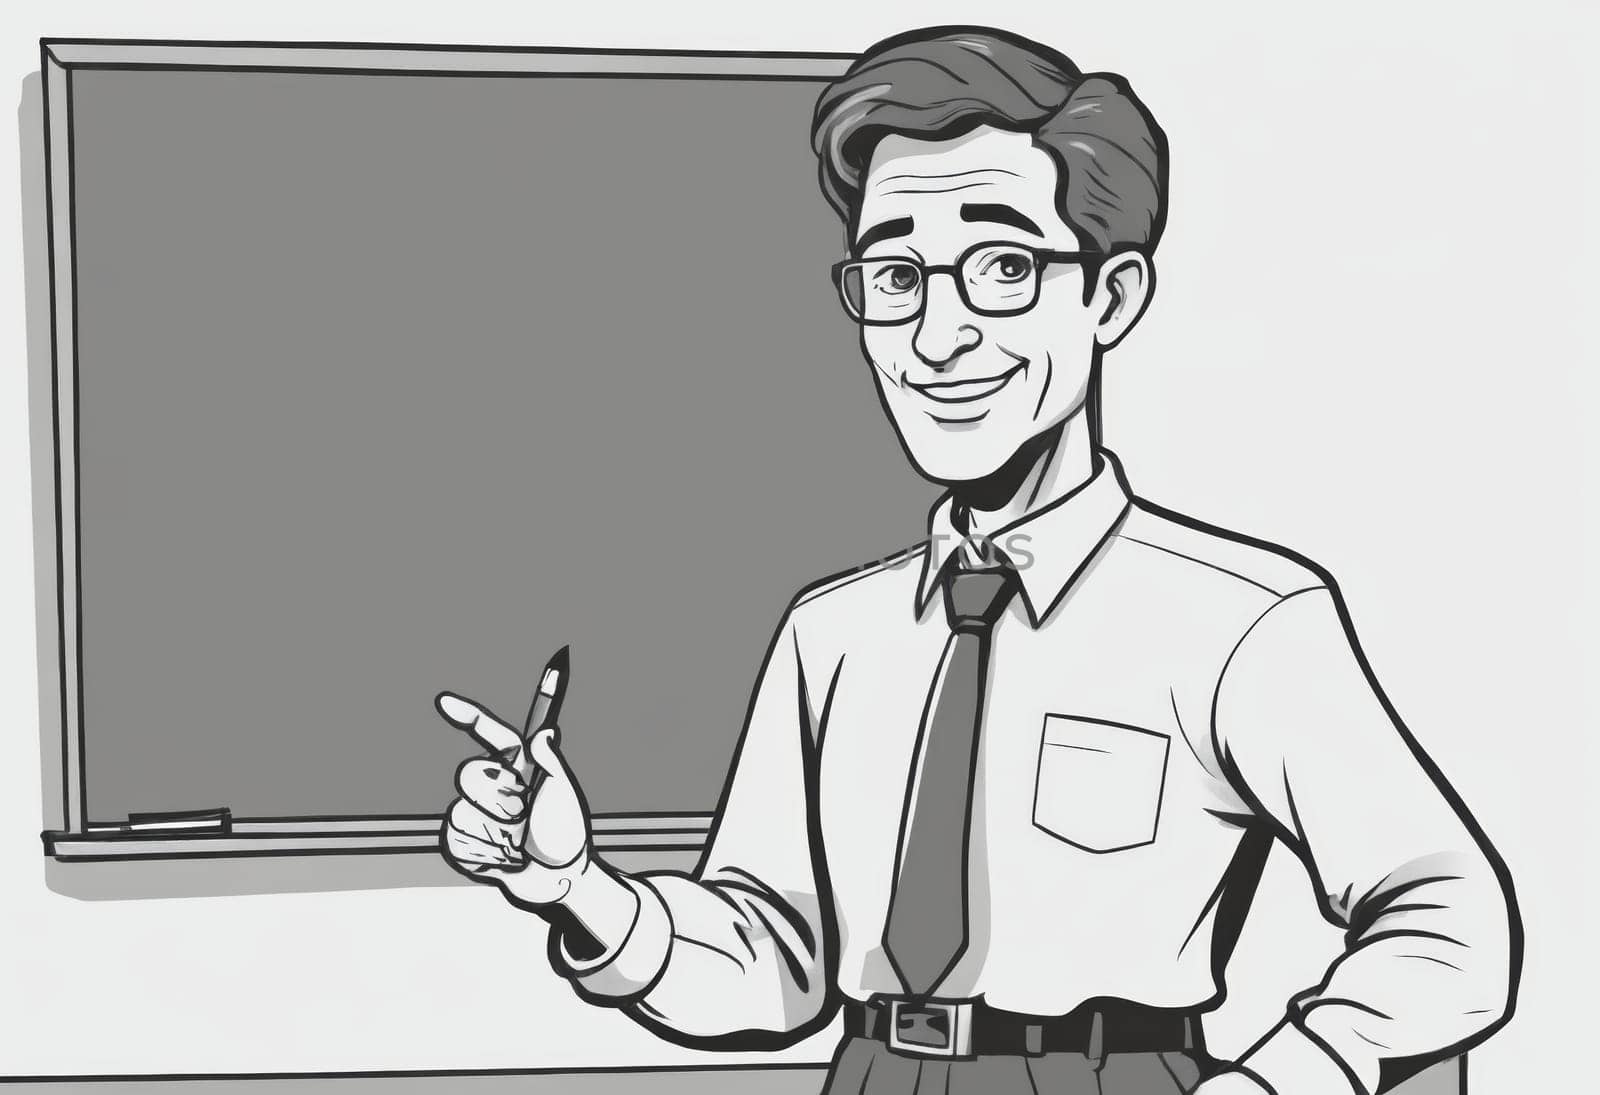 Suited individual lectures diligently at a desk, papers scattered, with a chalkboard backdrop signifying authority in education.